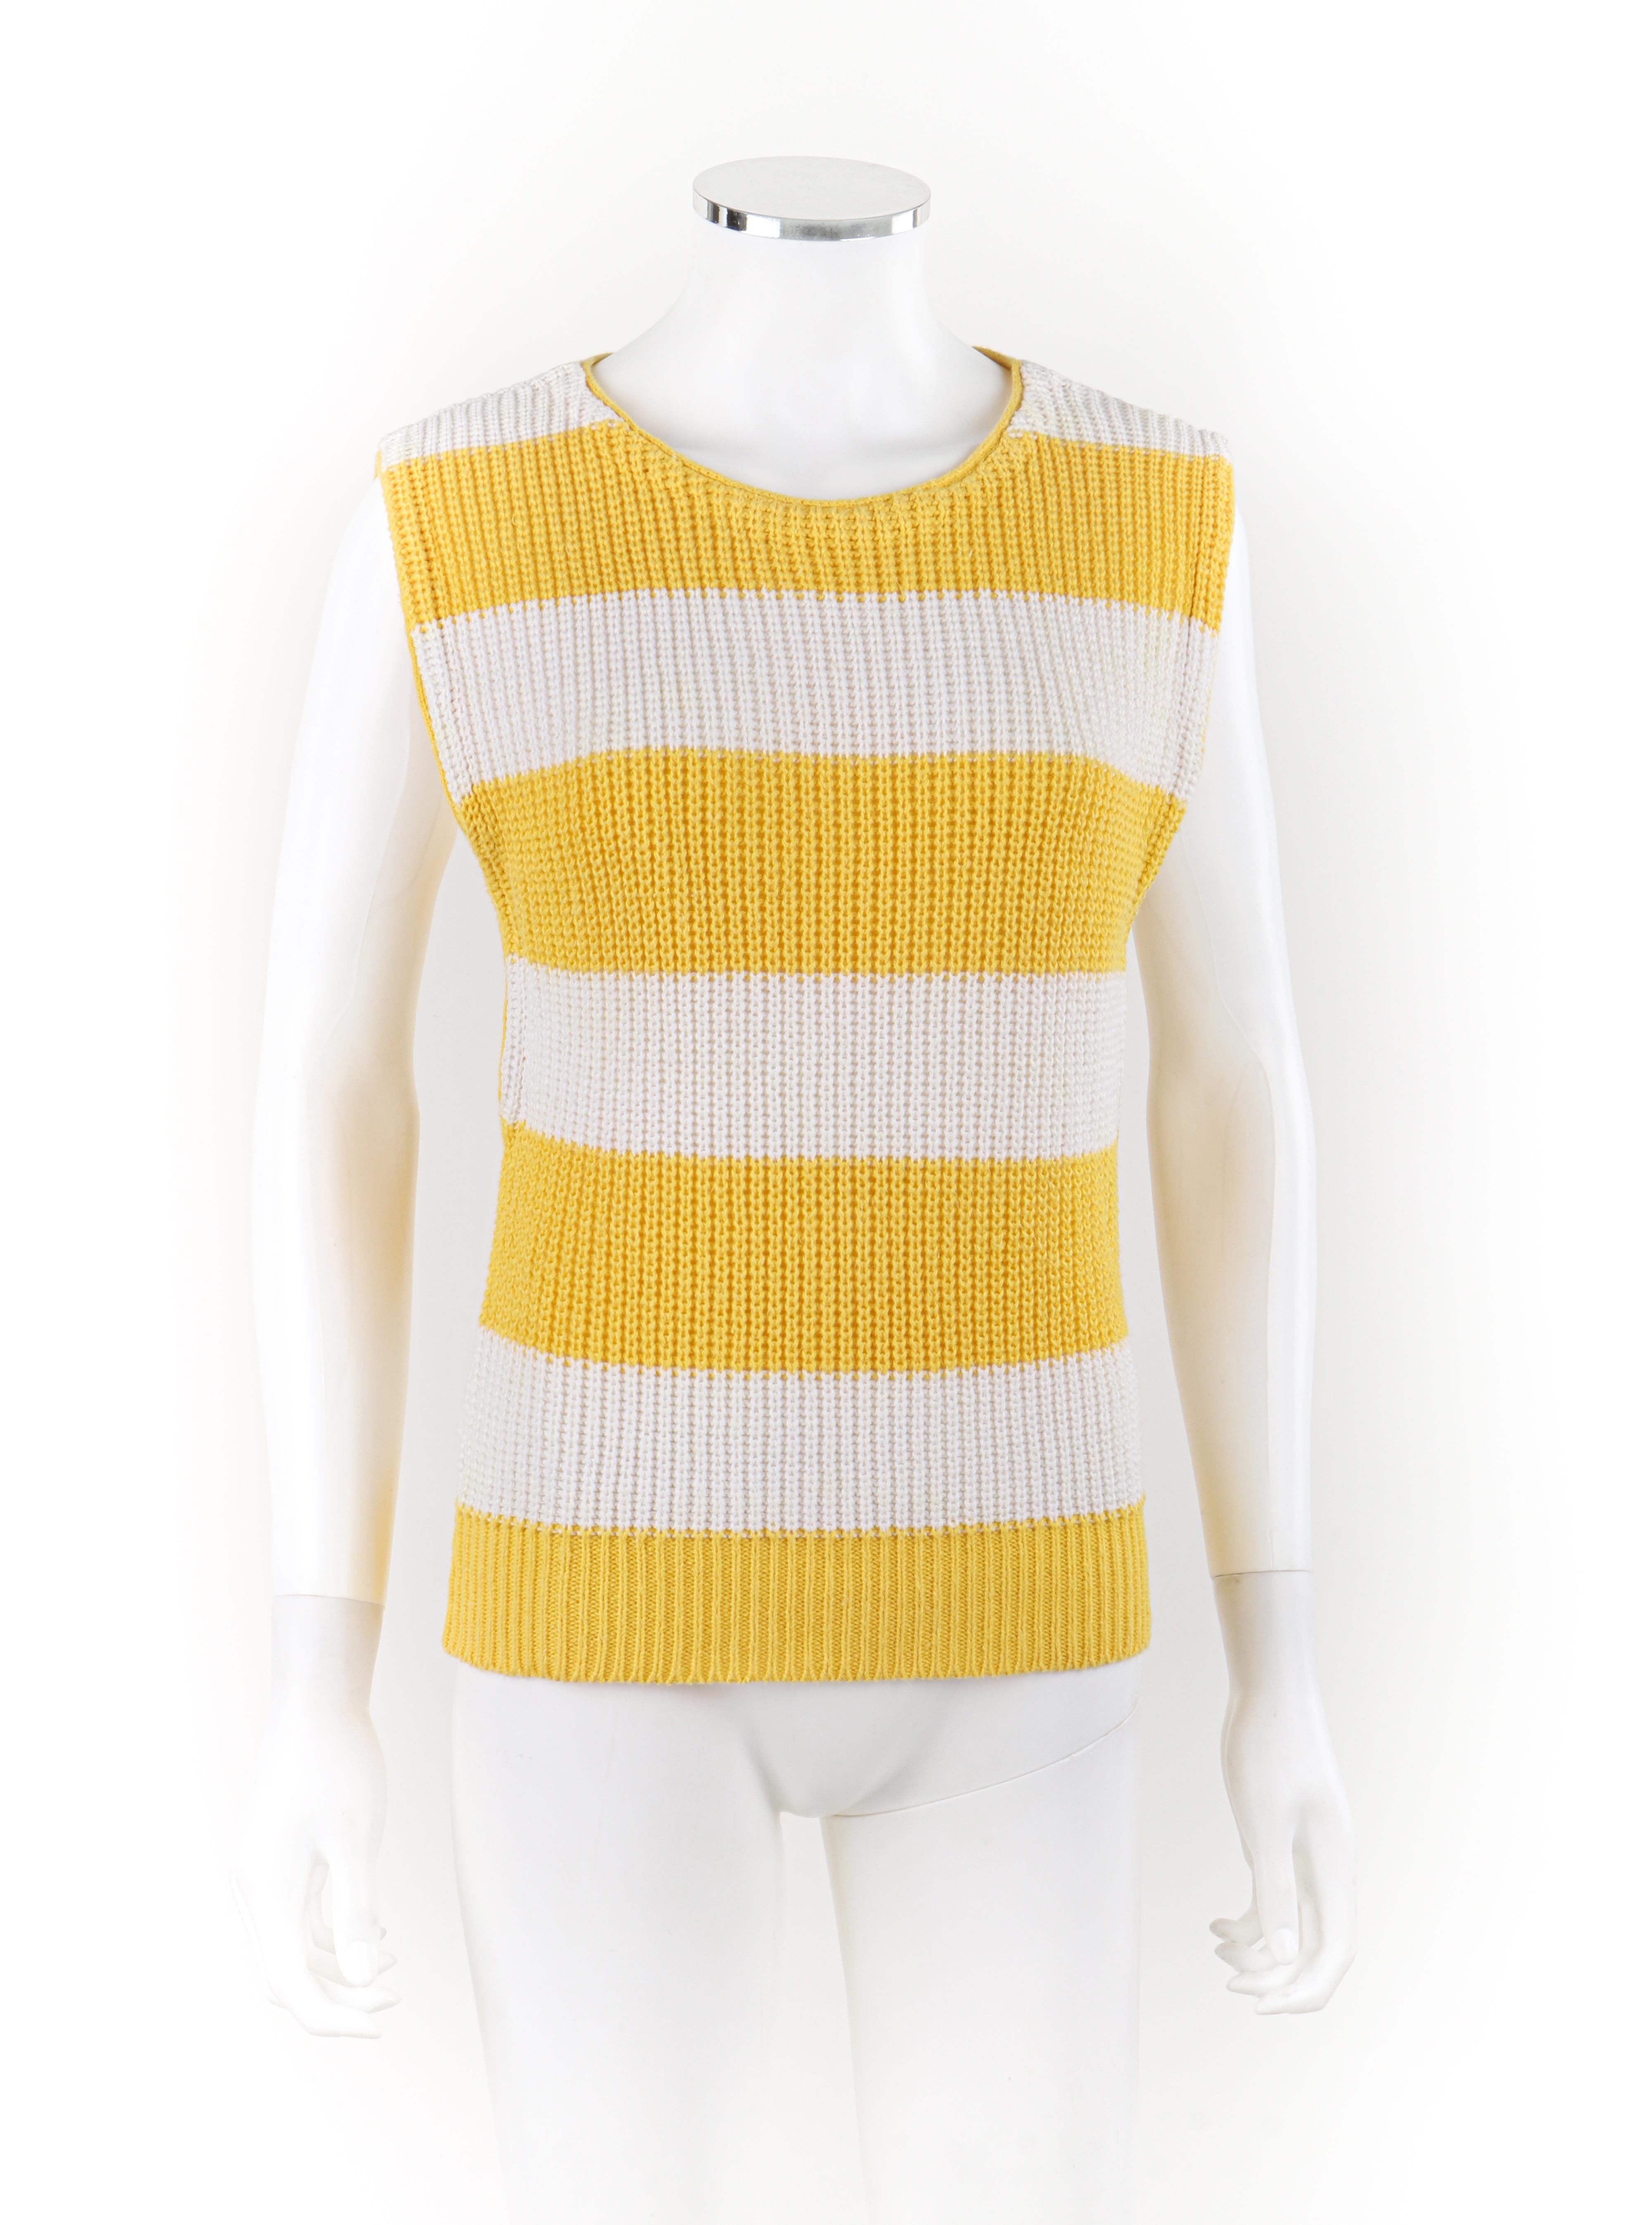 Brand / Manufacturer: Diane Von Furstenberg
Circa: 1980s
Designer: Diane von Furstenberg
Style: Sweater top
Color(s): Shades of yellow, white
Lined: No
Marked Fabric Content: 